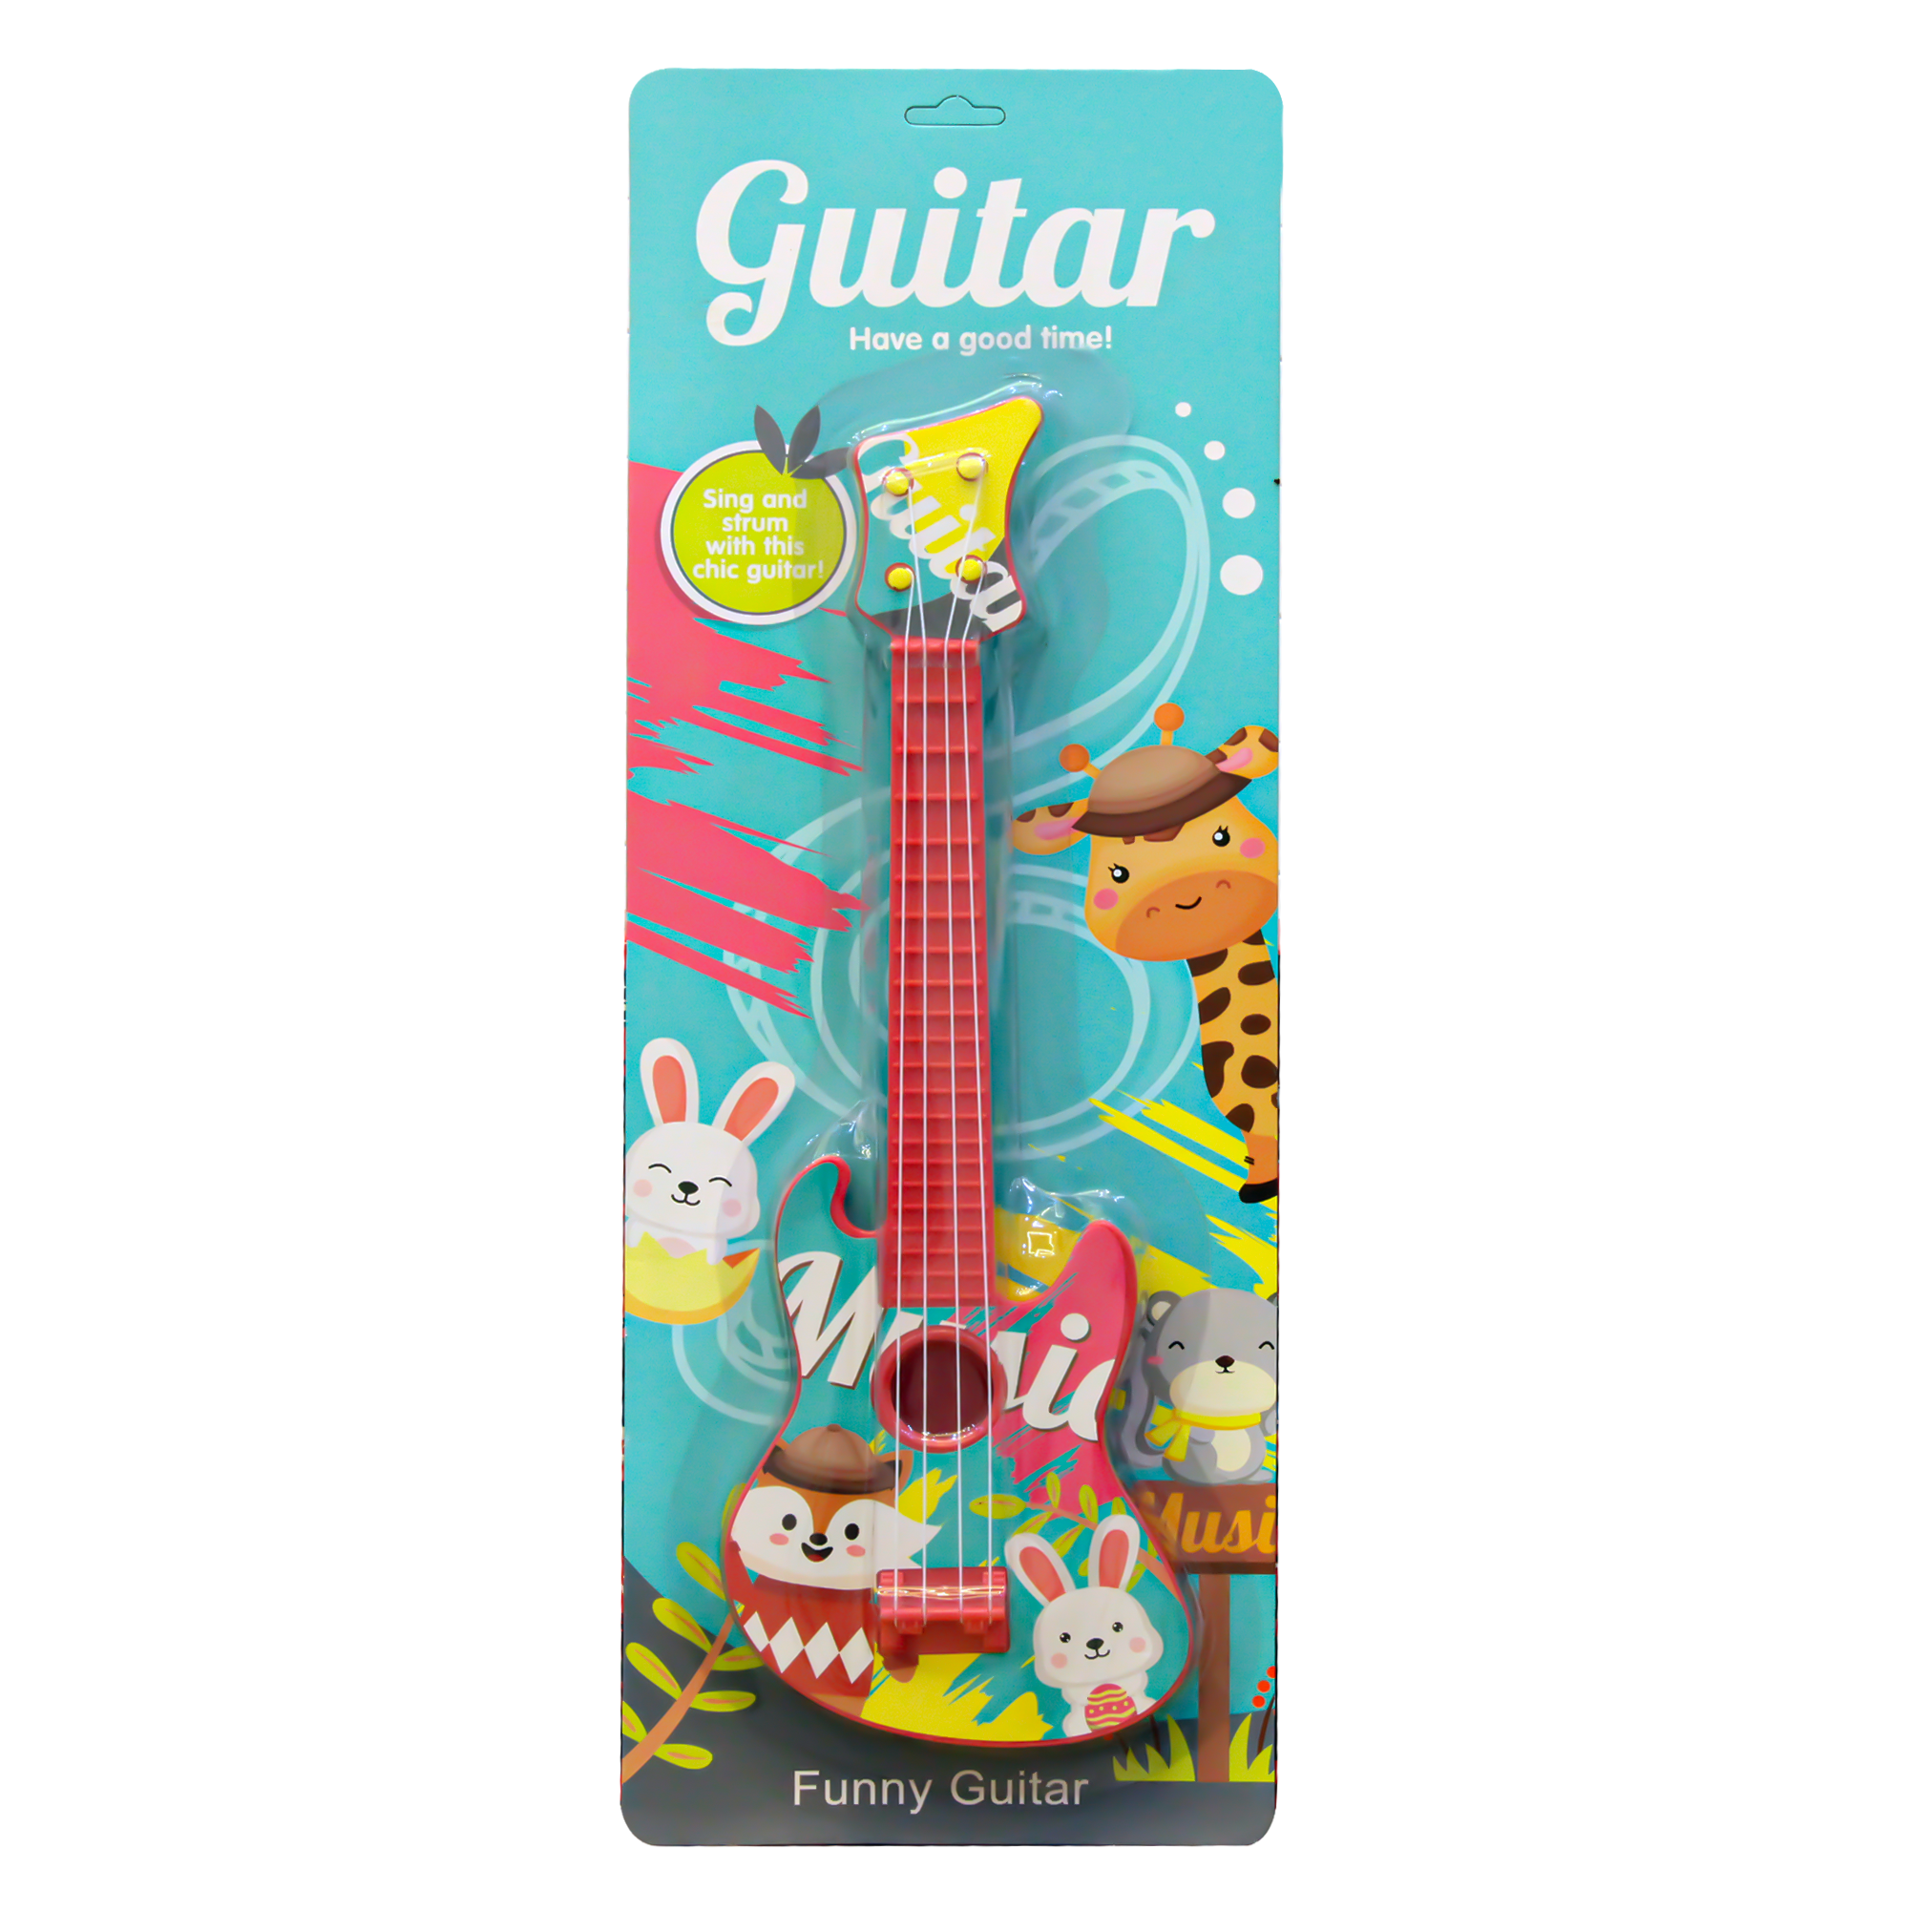 Funny and chic music guitar - colors may vary